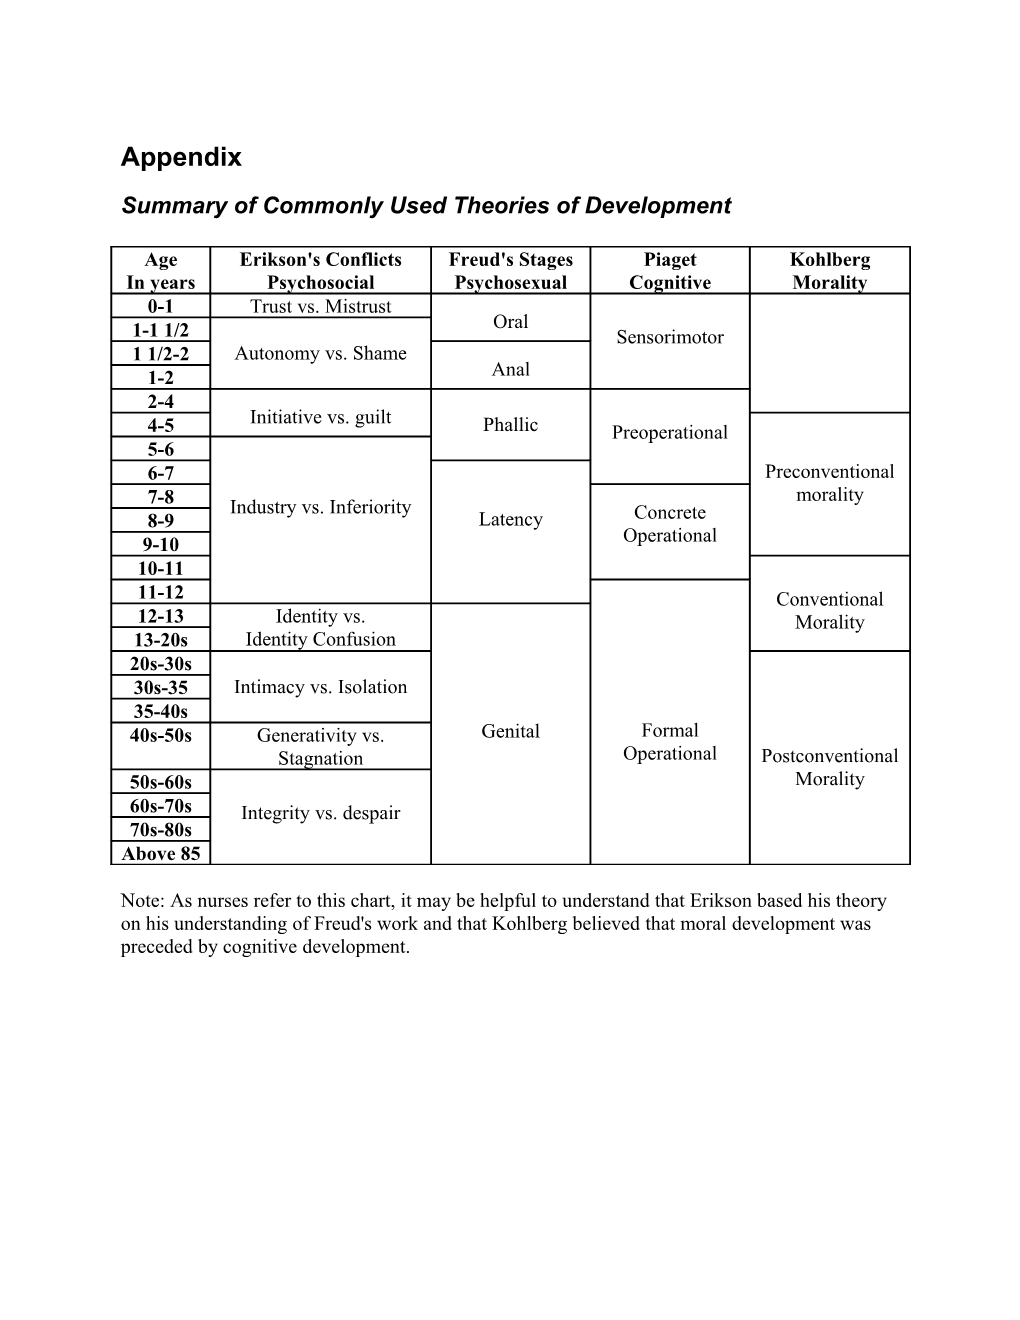 Summary of Commonly Used Theories of Development